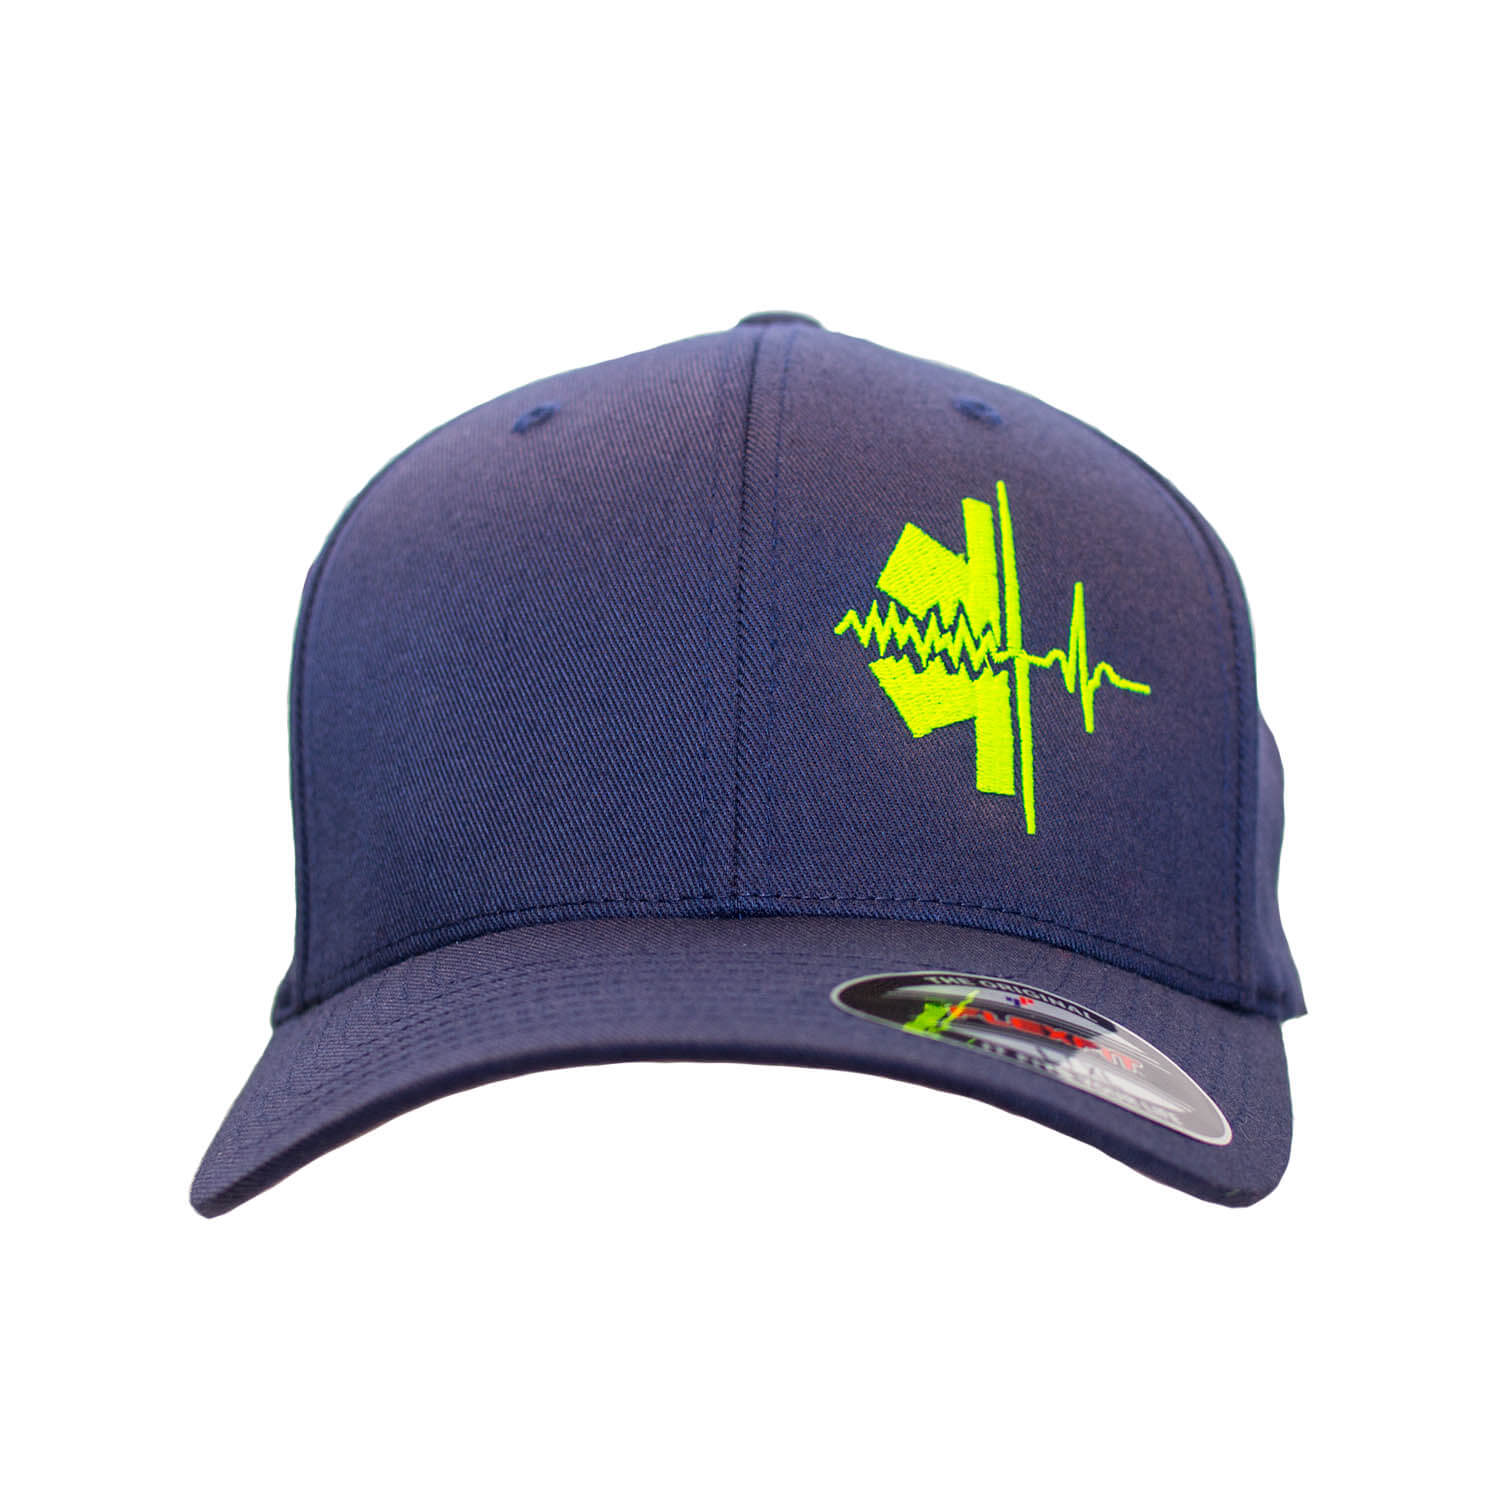 RESCUE Star of Life Basecap Navy - Neon Line